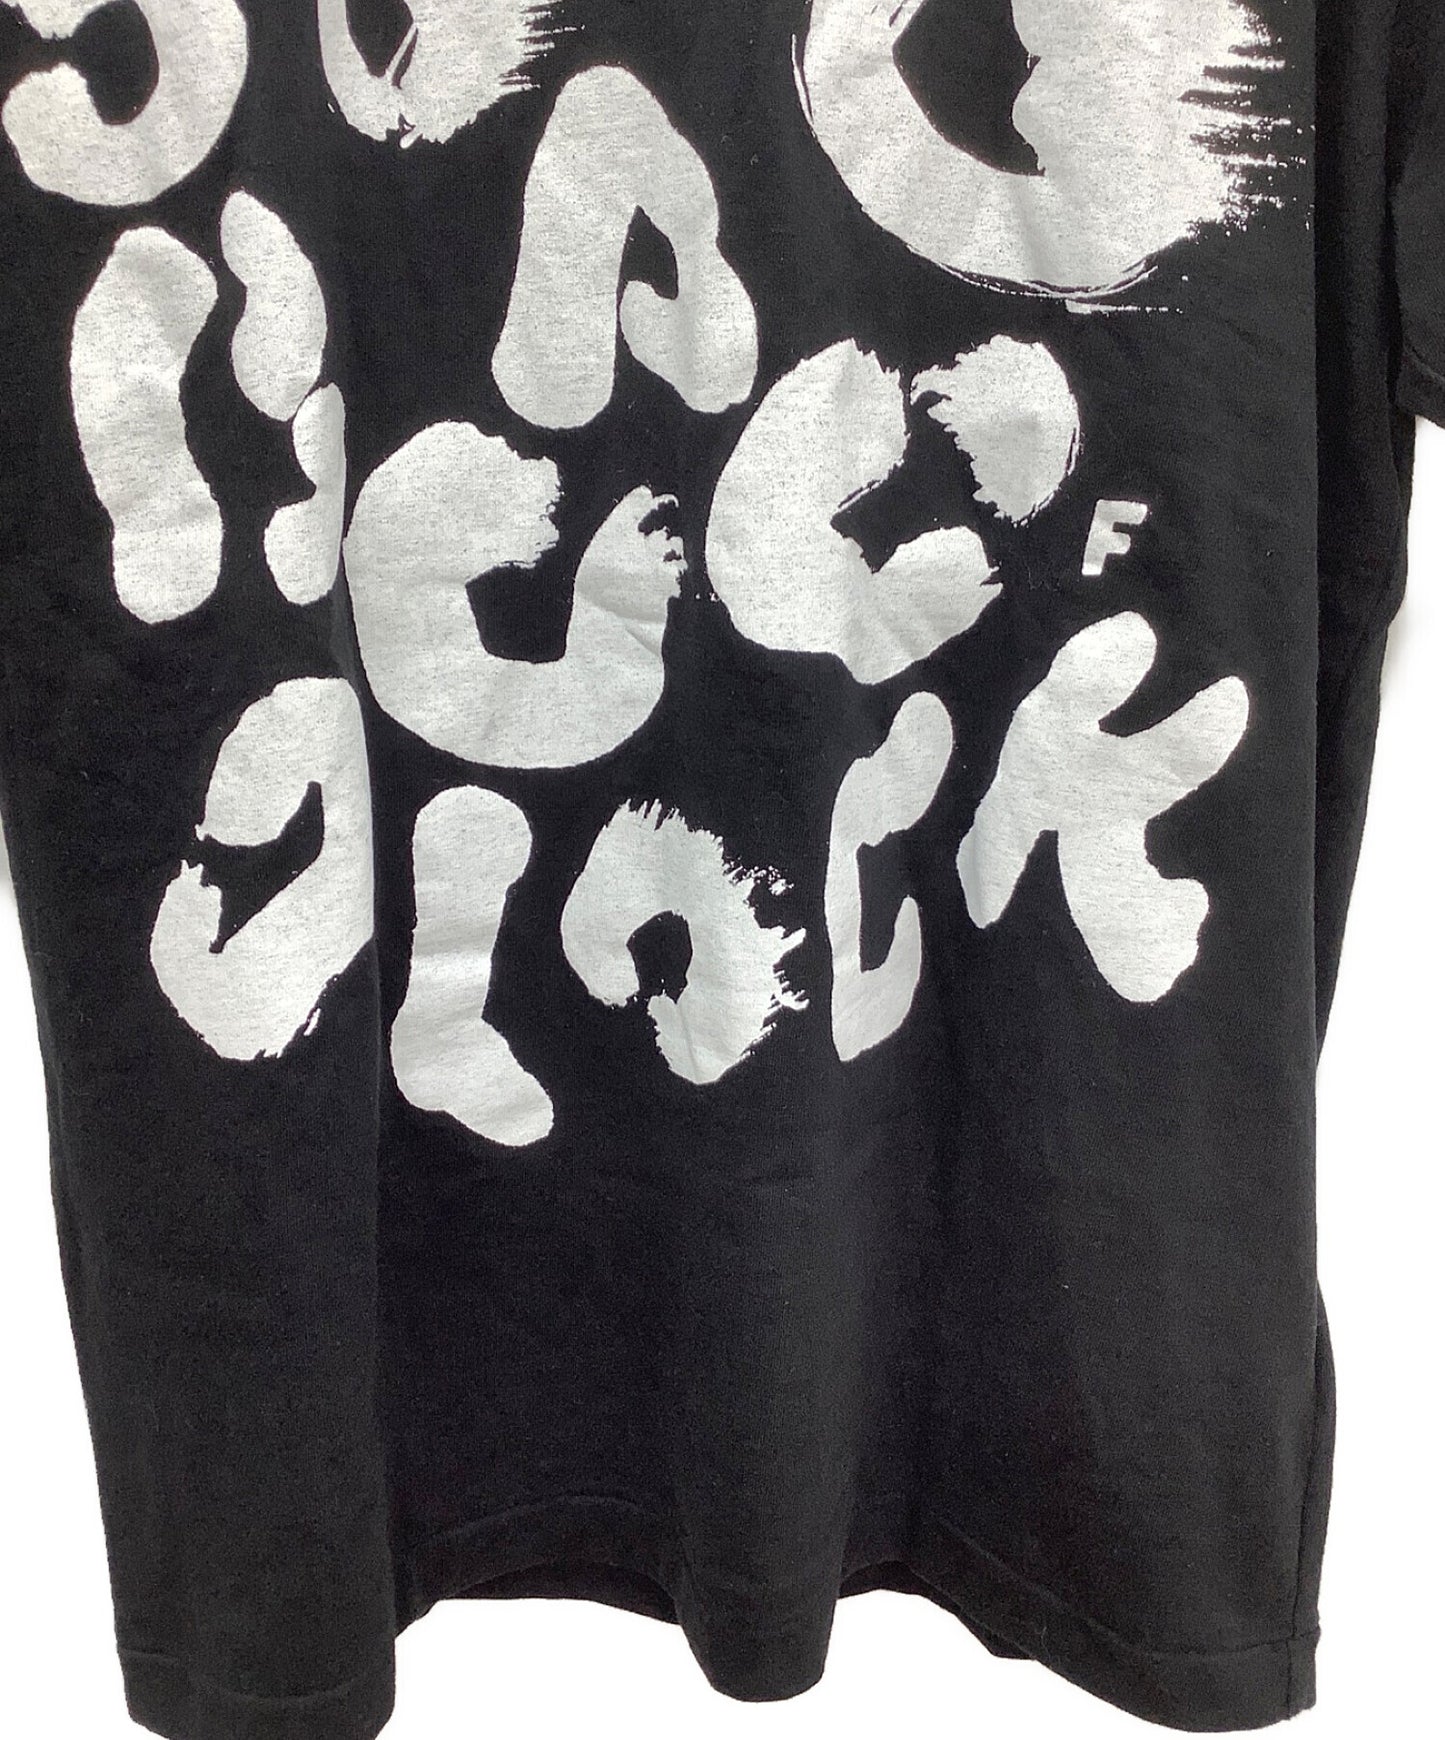 [Pre-owned] BLACK COMME des GARCONS printed cut-and-sew 1G-T002